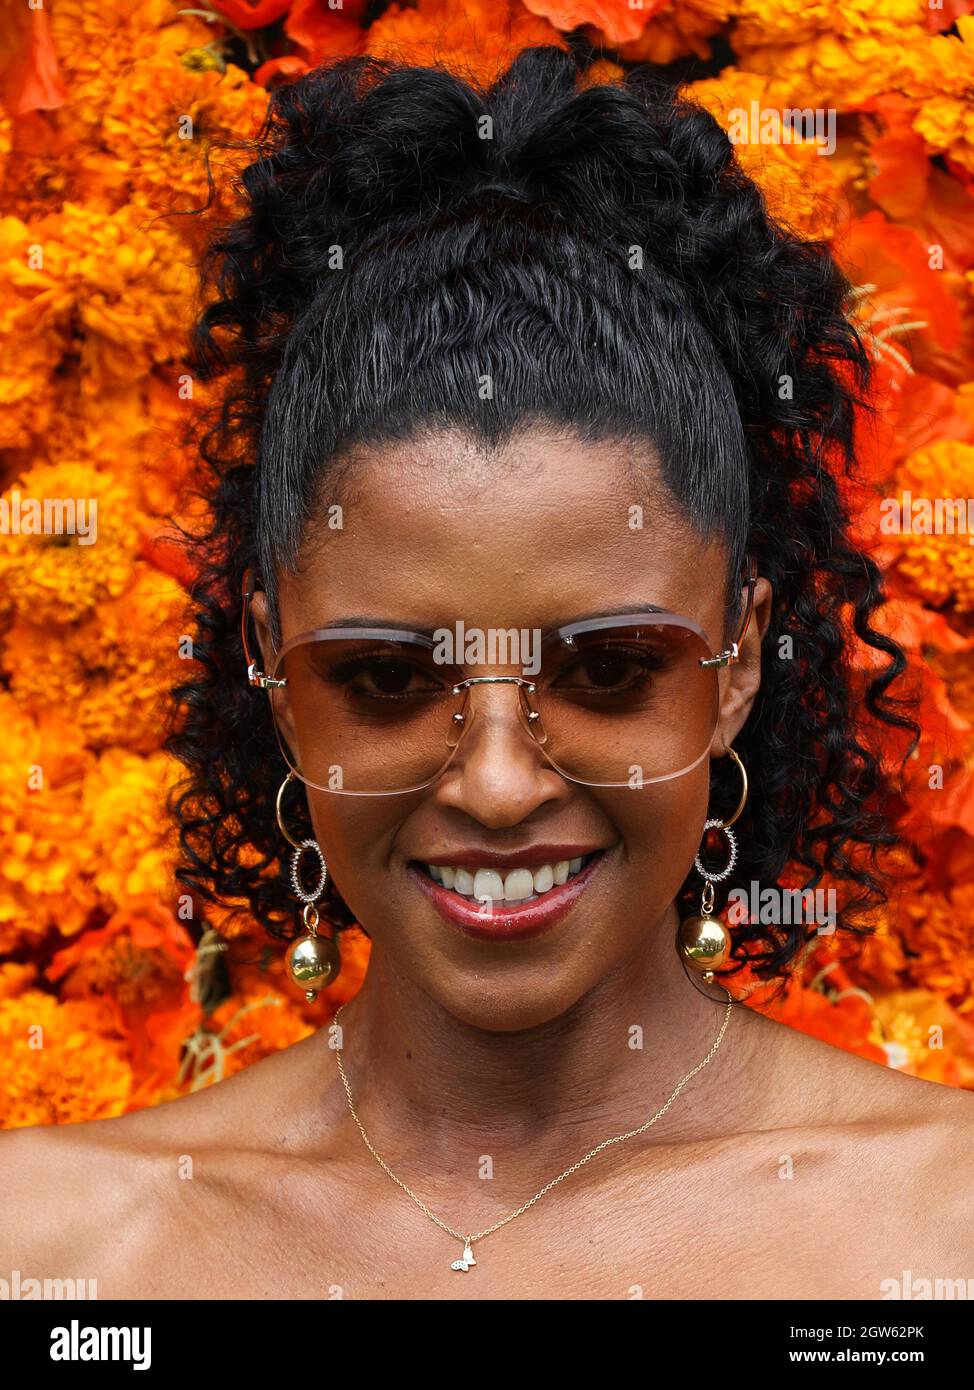 PACIFIC PALISADES, LOS ANGELES, CALIFORNIA, USA - OCTOBER 02: Actress Renee Elise Goldsberry wearing Longchamp sunglasses arrives at the Veuve Clicquot Polo Classic Los Angeles 2021 held at the Will Rogers State Historic Park on October 2, 2021 in Pacific Palisades, Los Angeles, California, United States. (Photo by Xavier Collin/Image Press Agency) Stock Photo